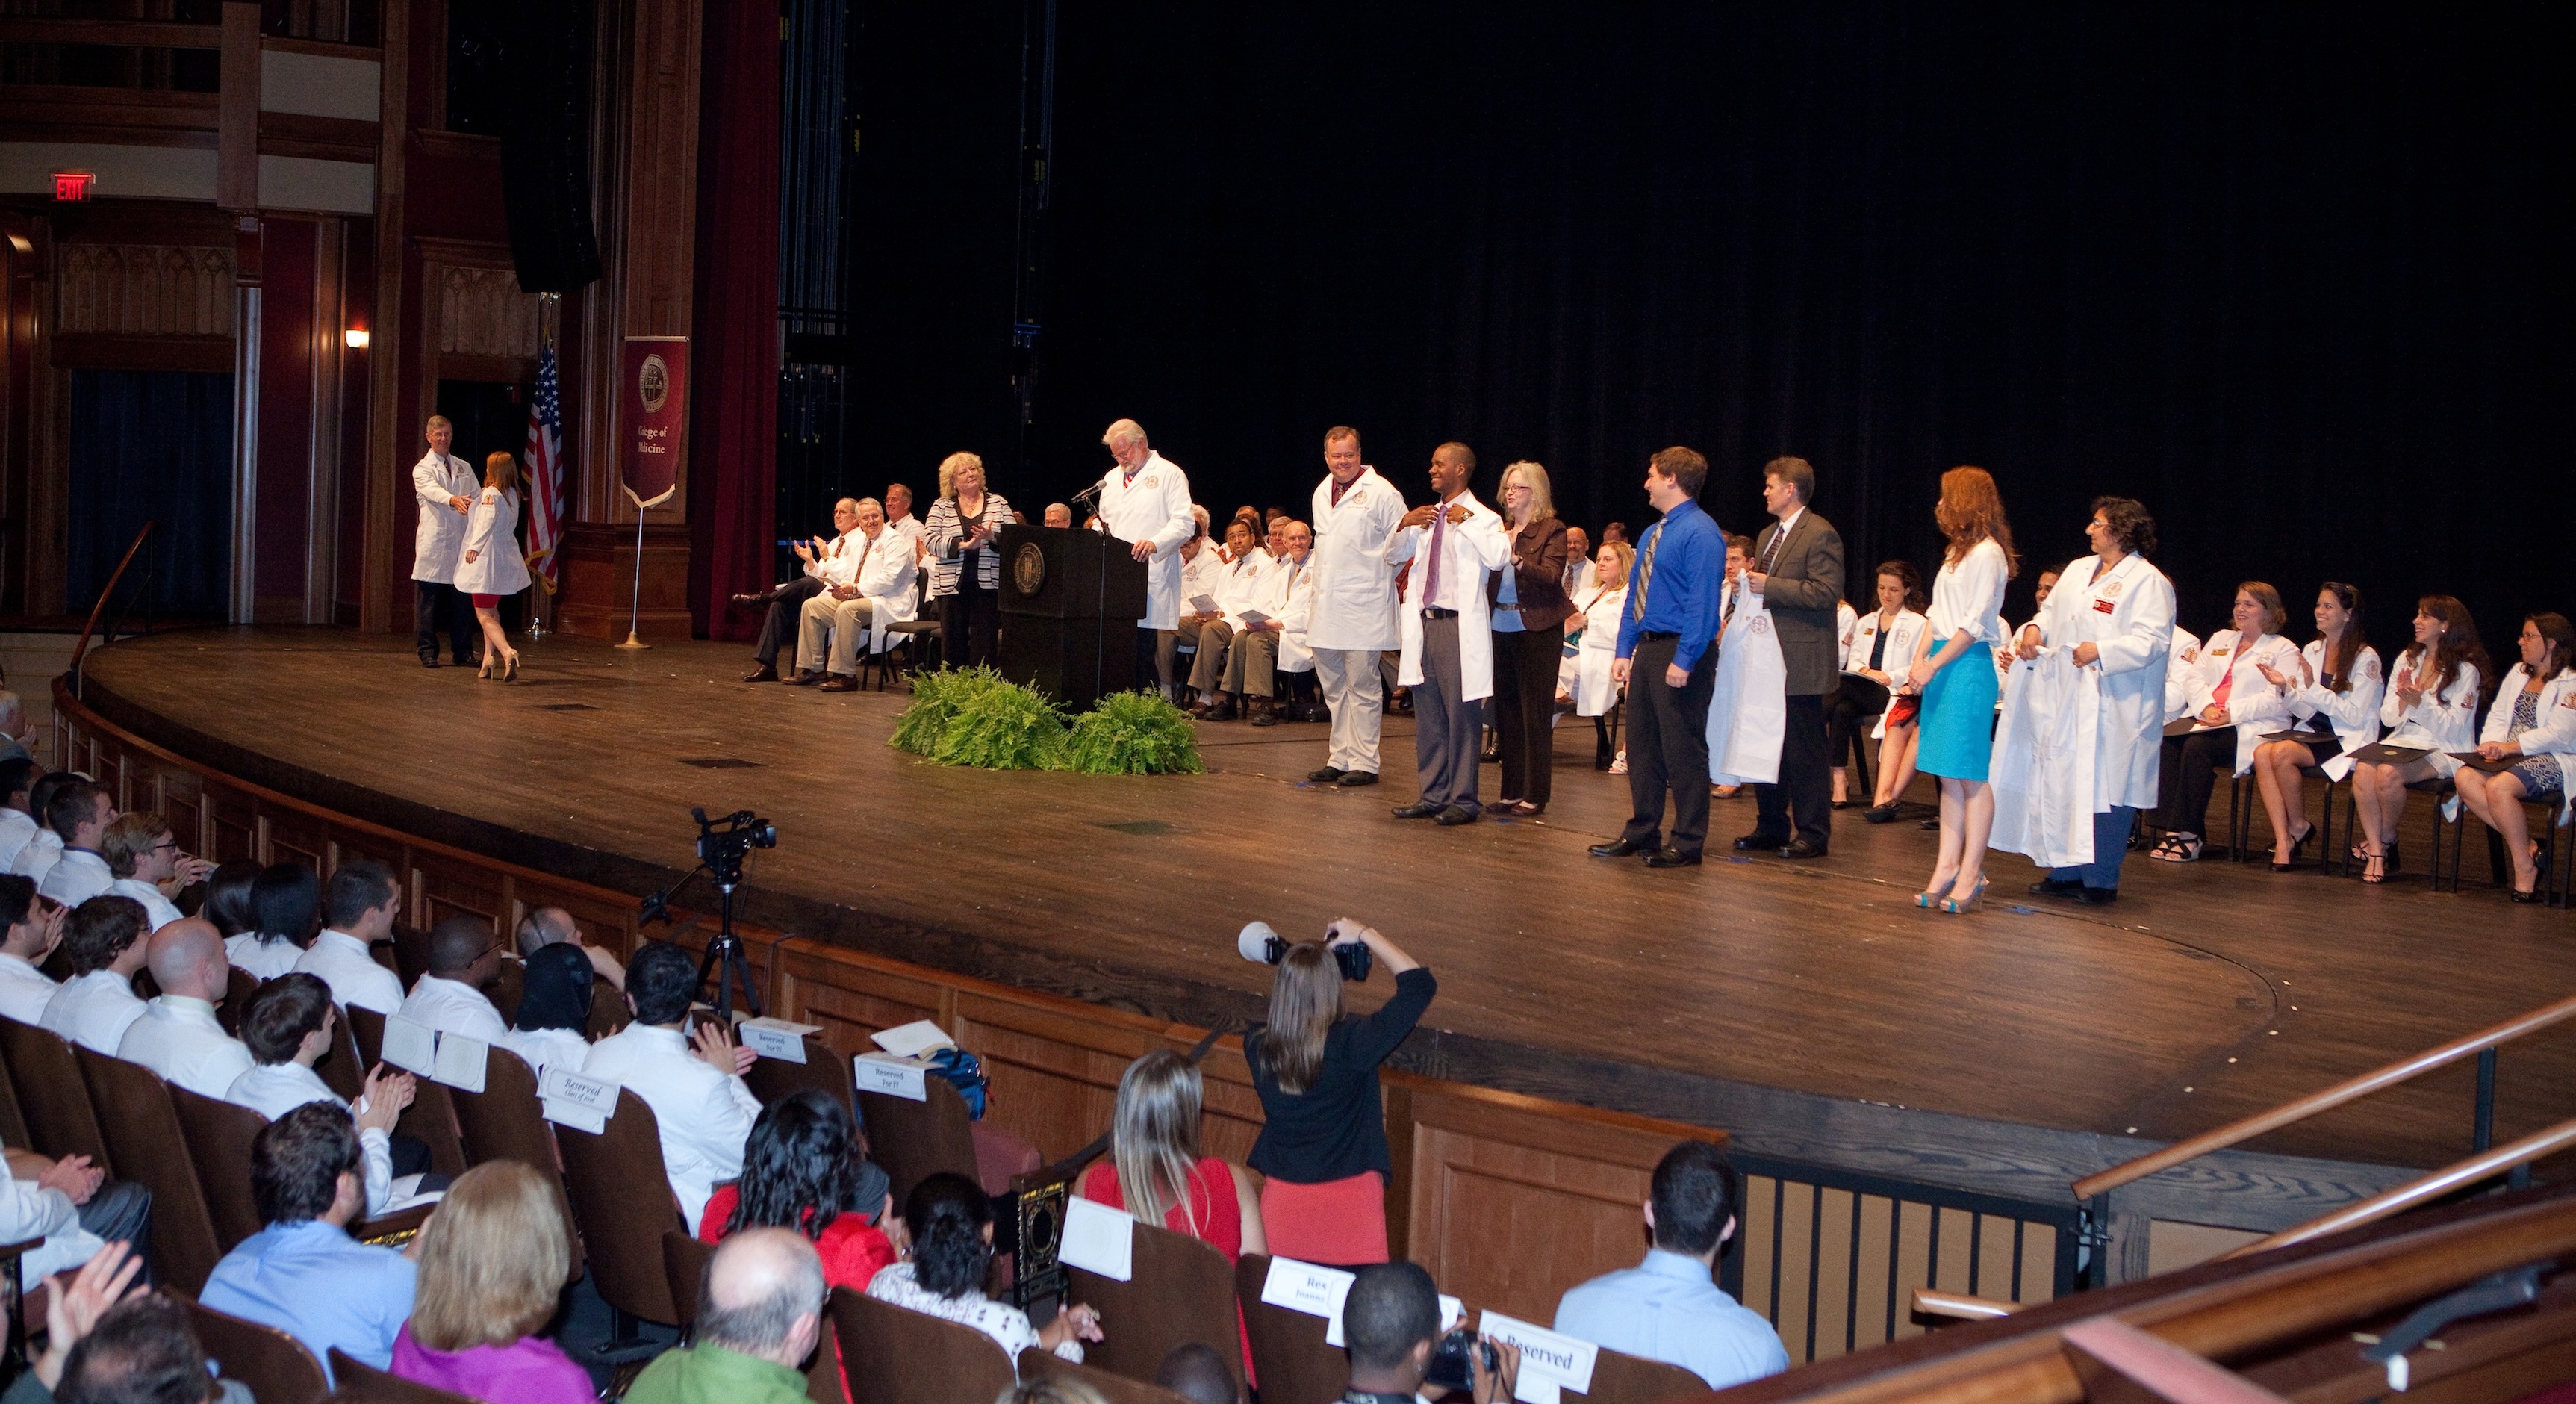 Family members watch proudly from the audience as the students are called one by one to receive their white coats.